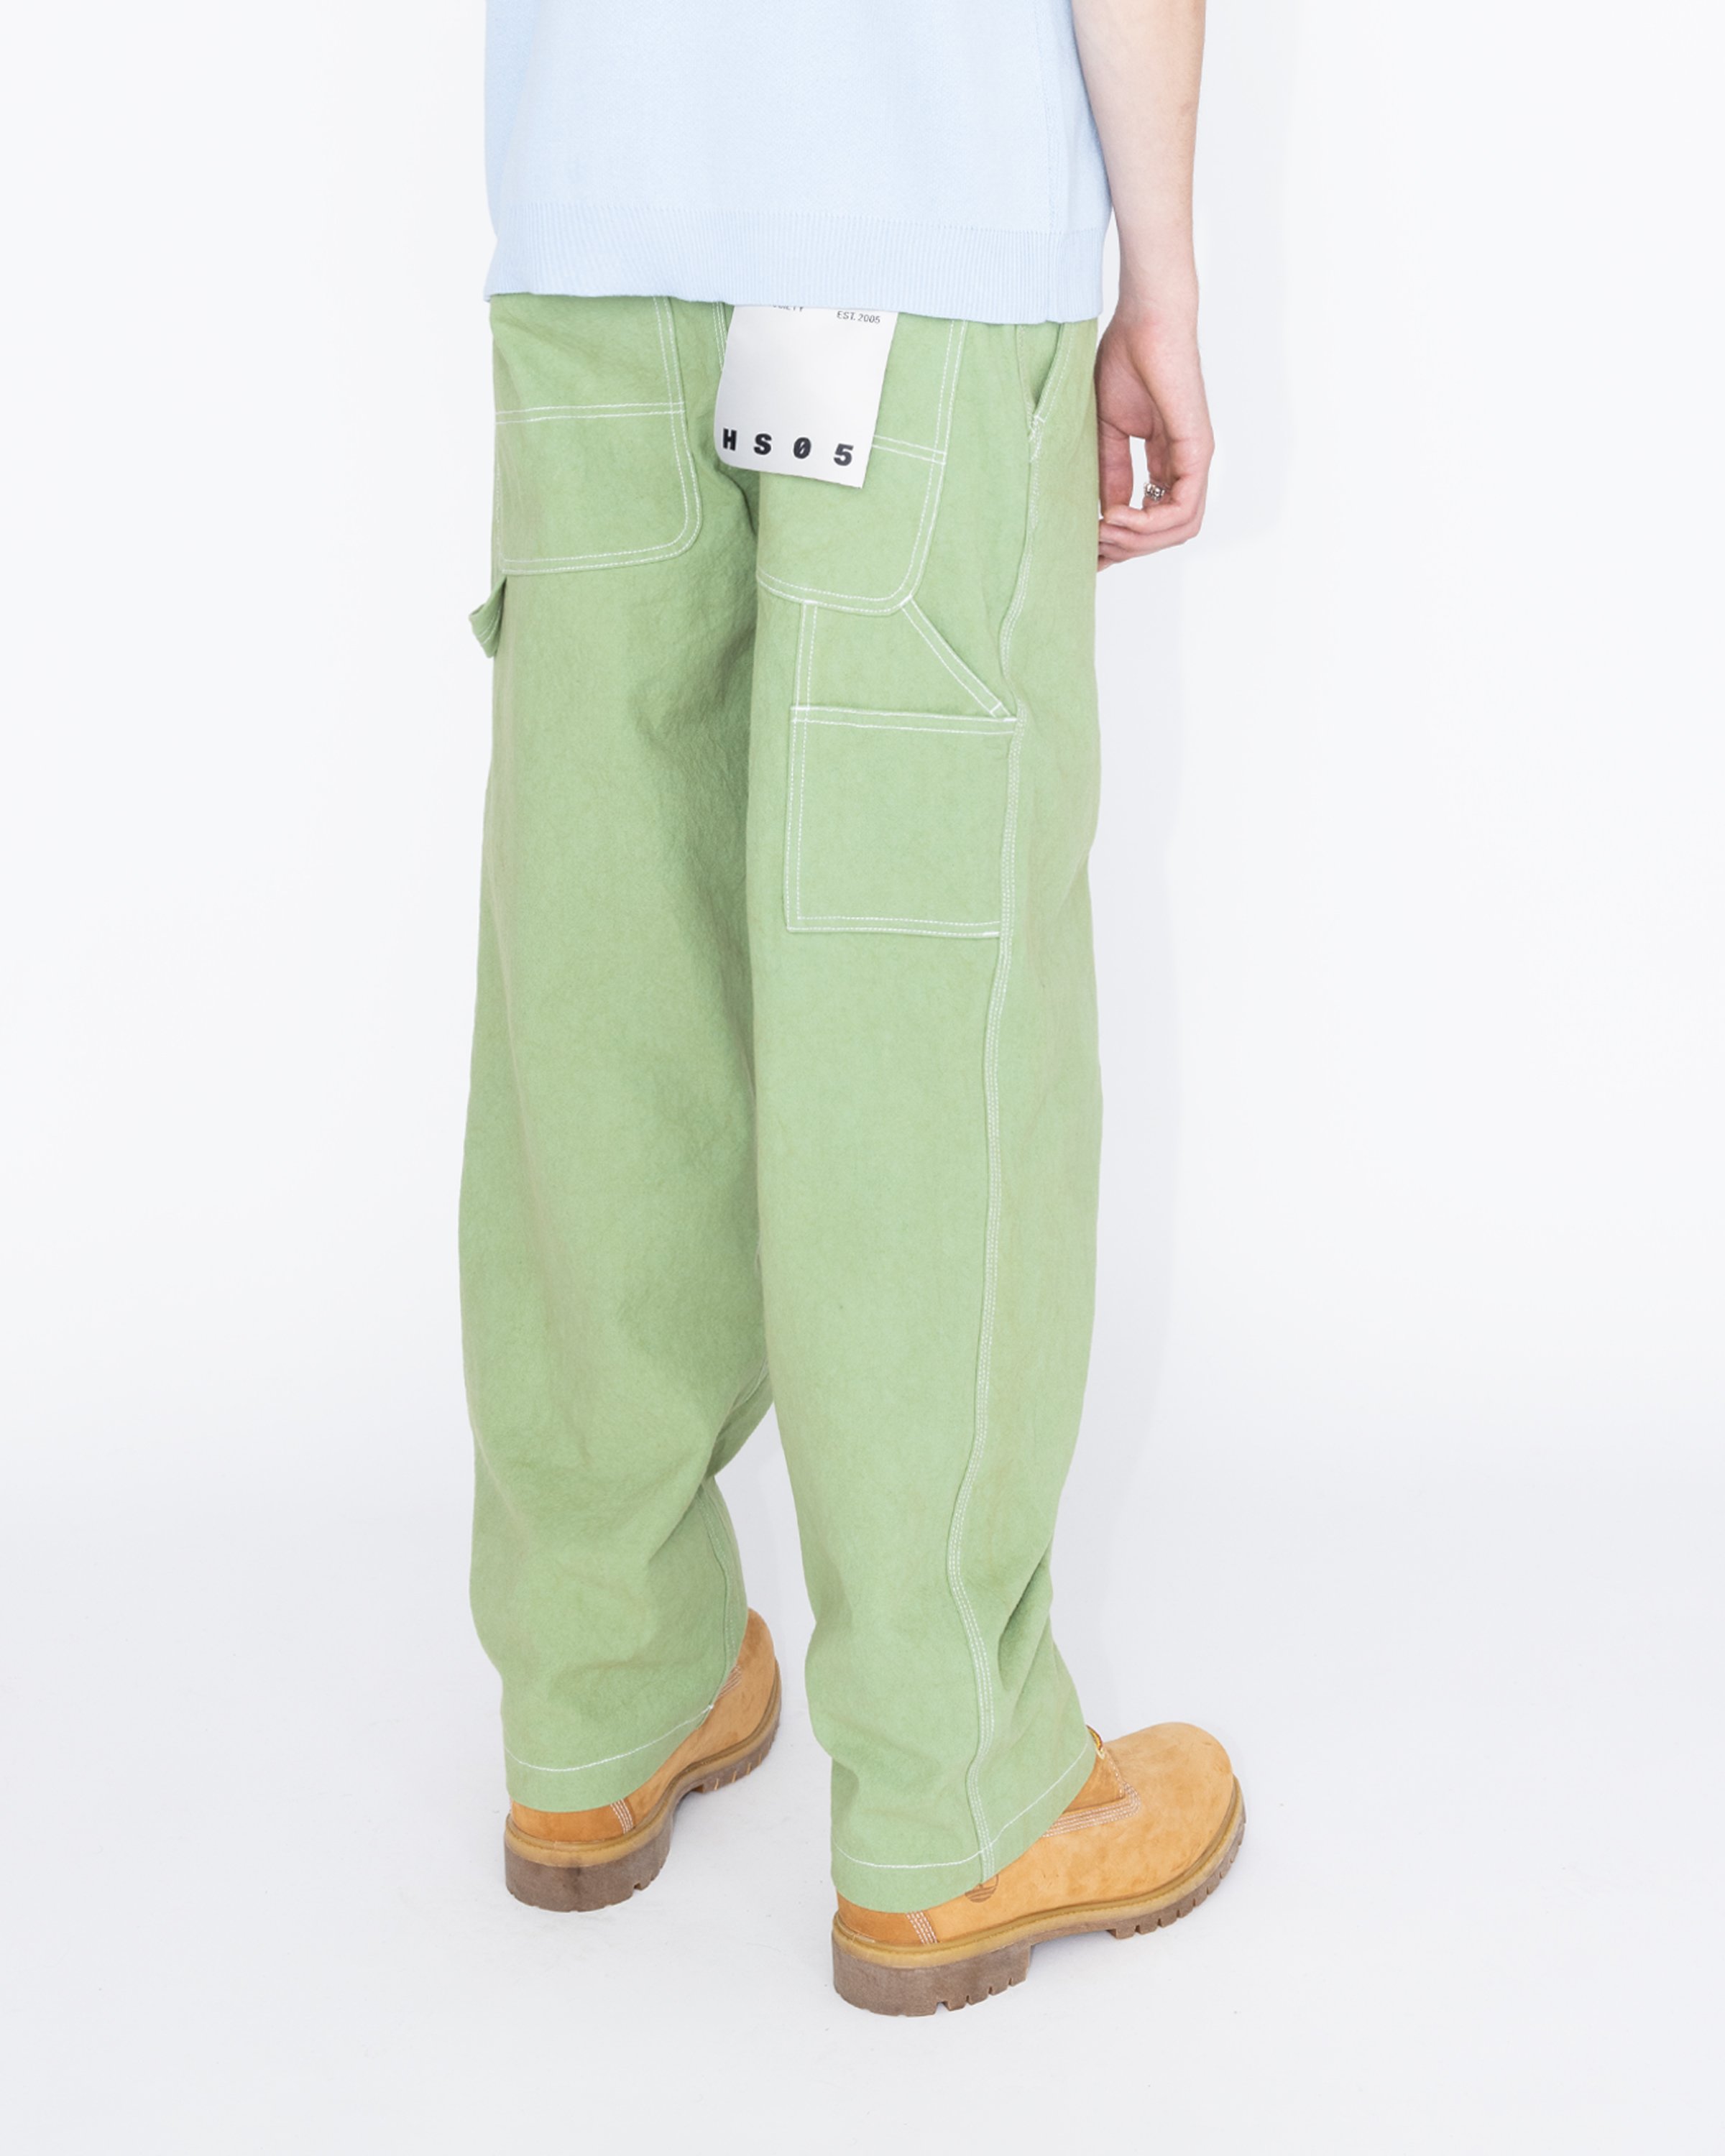 Highsnobiety HS05 - Sun Dried Canvas Carpenter Pants Green - Clothing - Green - Image 4